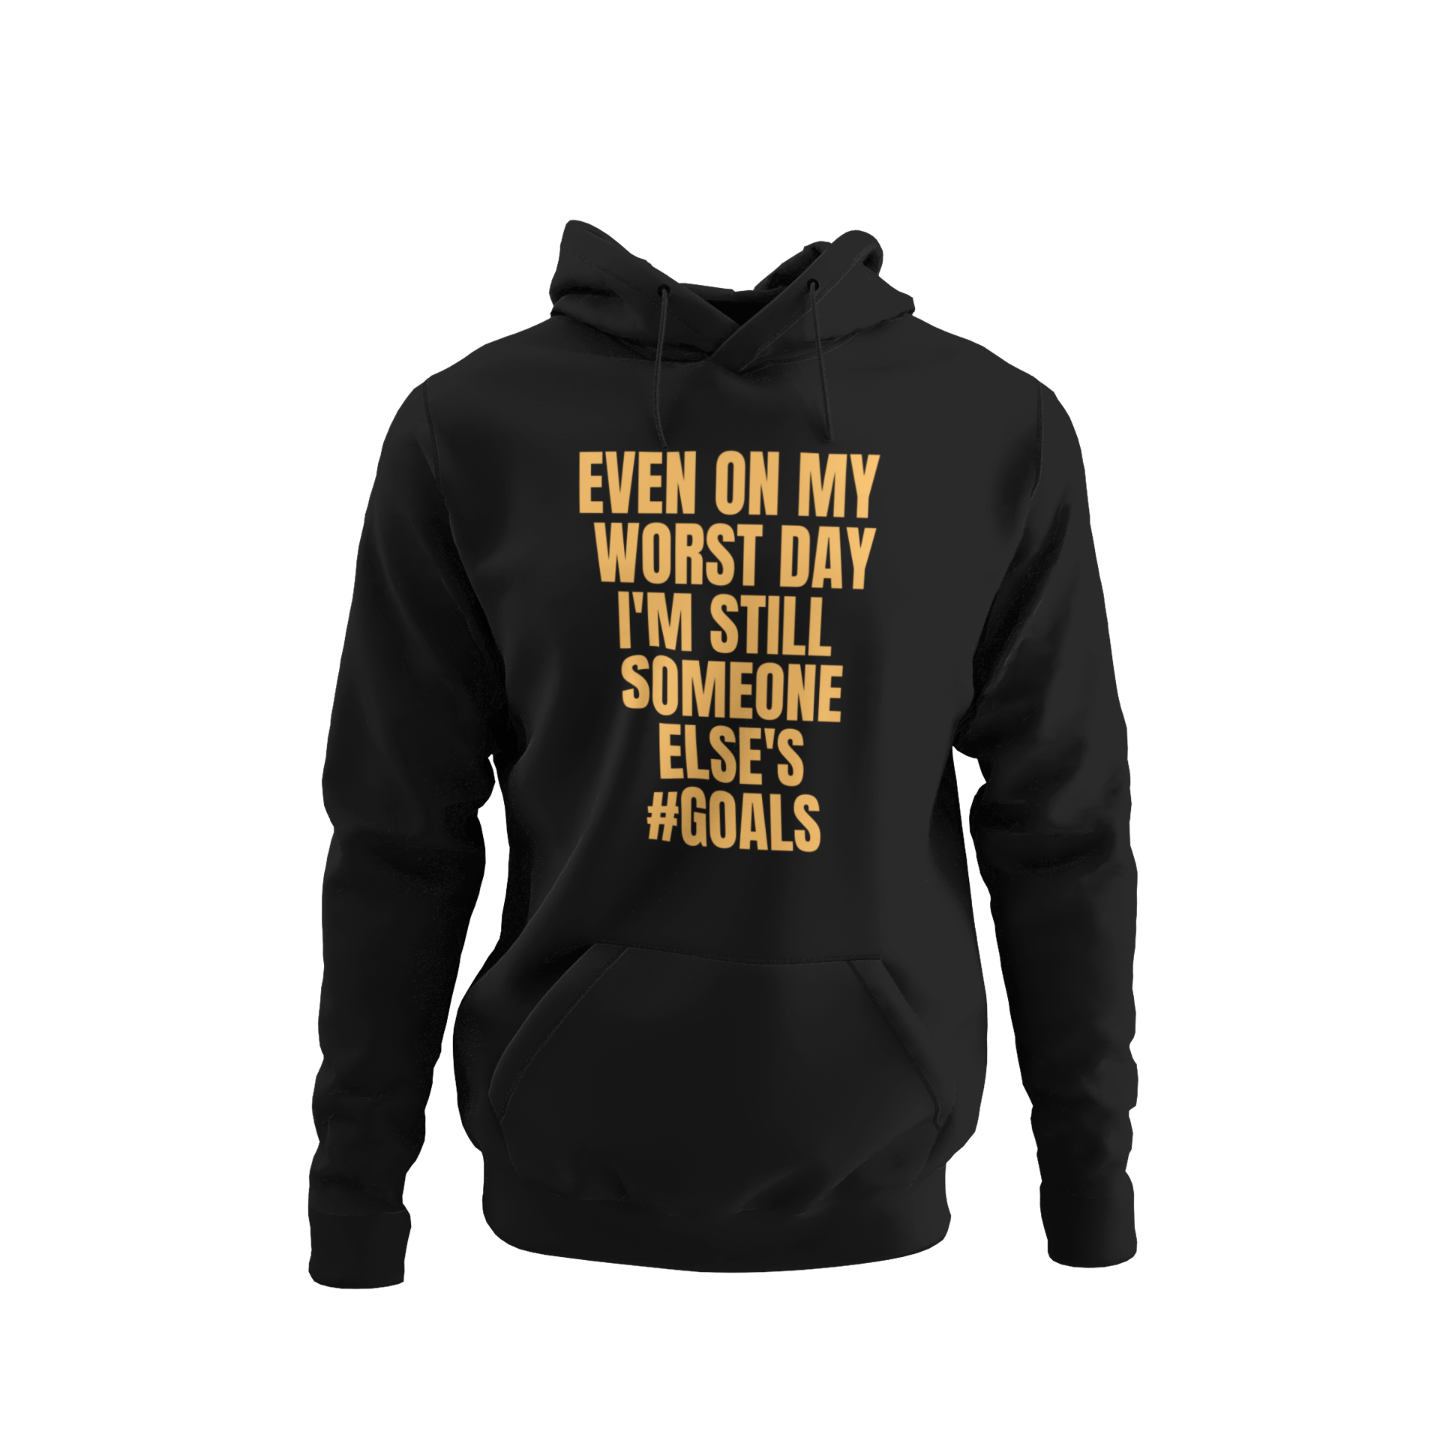 EVEN ON MY WORST DAY - Hoodie (BLACK/GOLD)